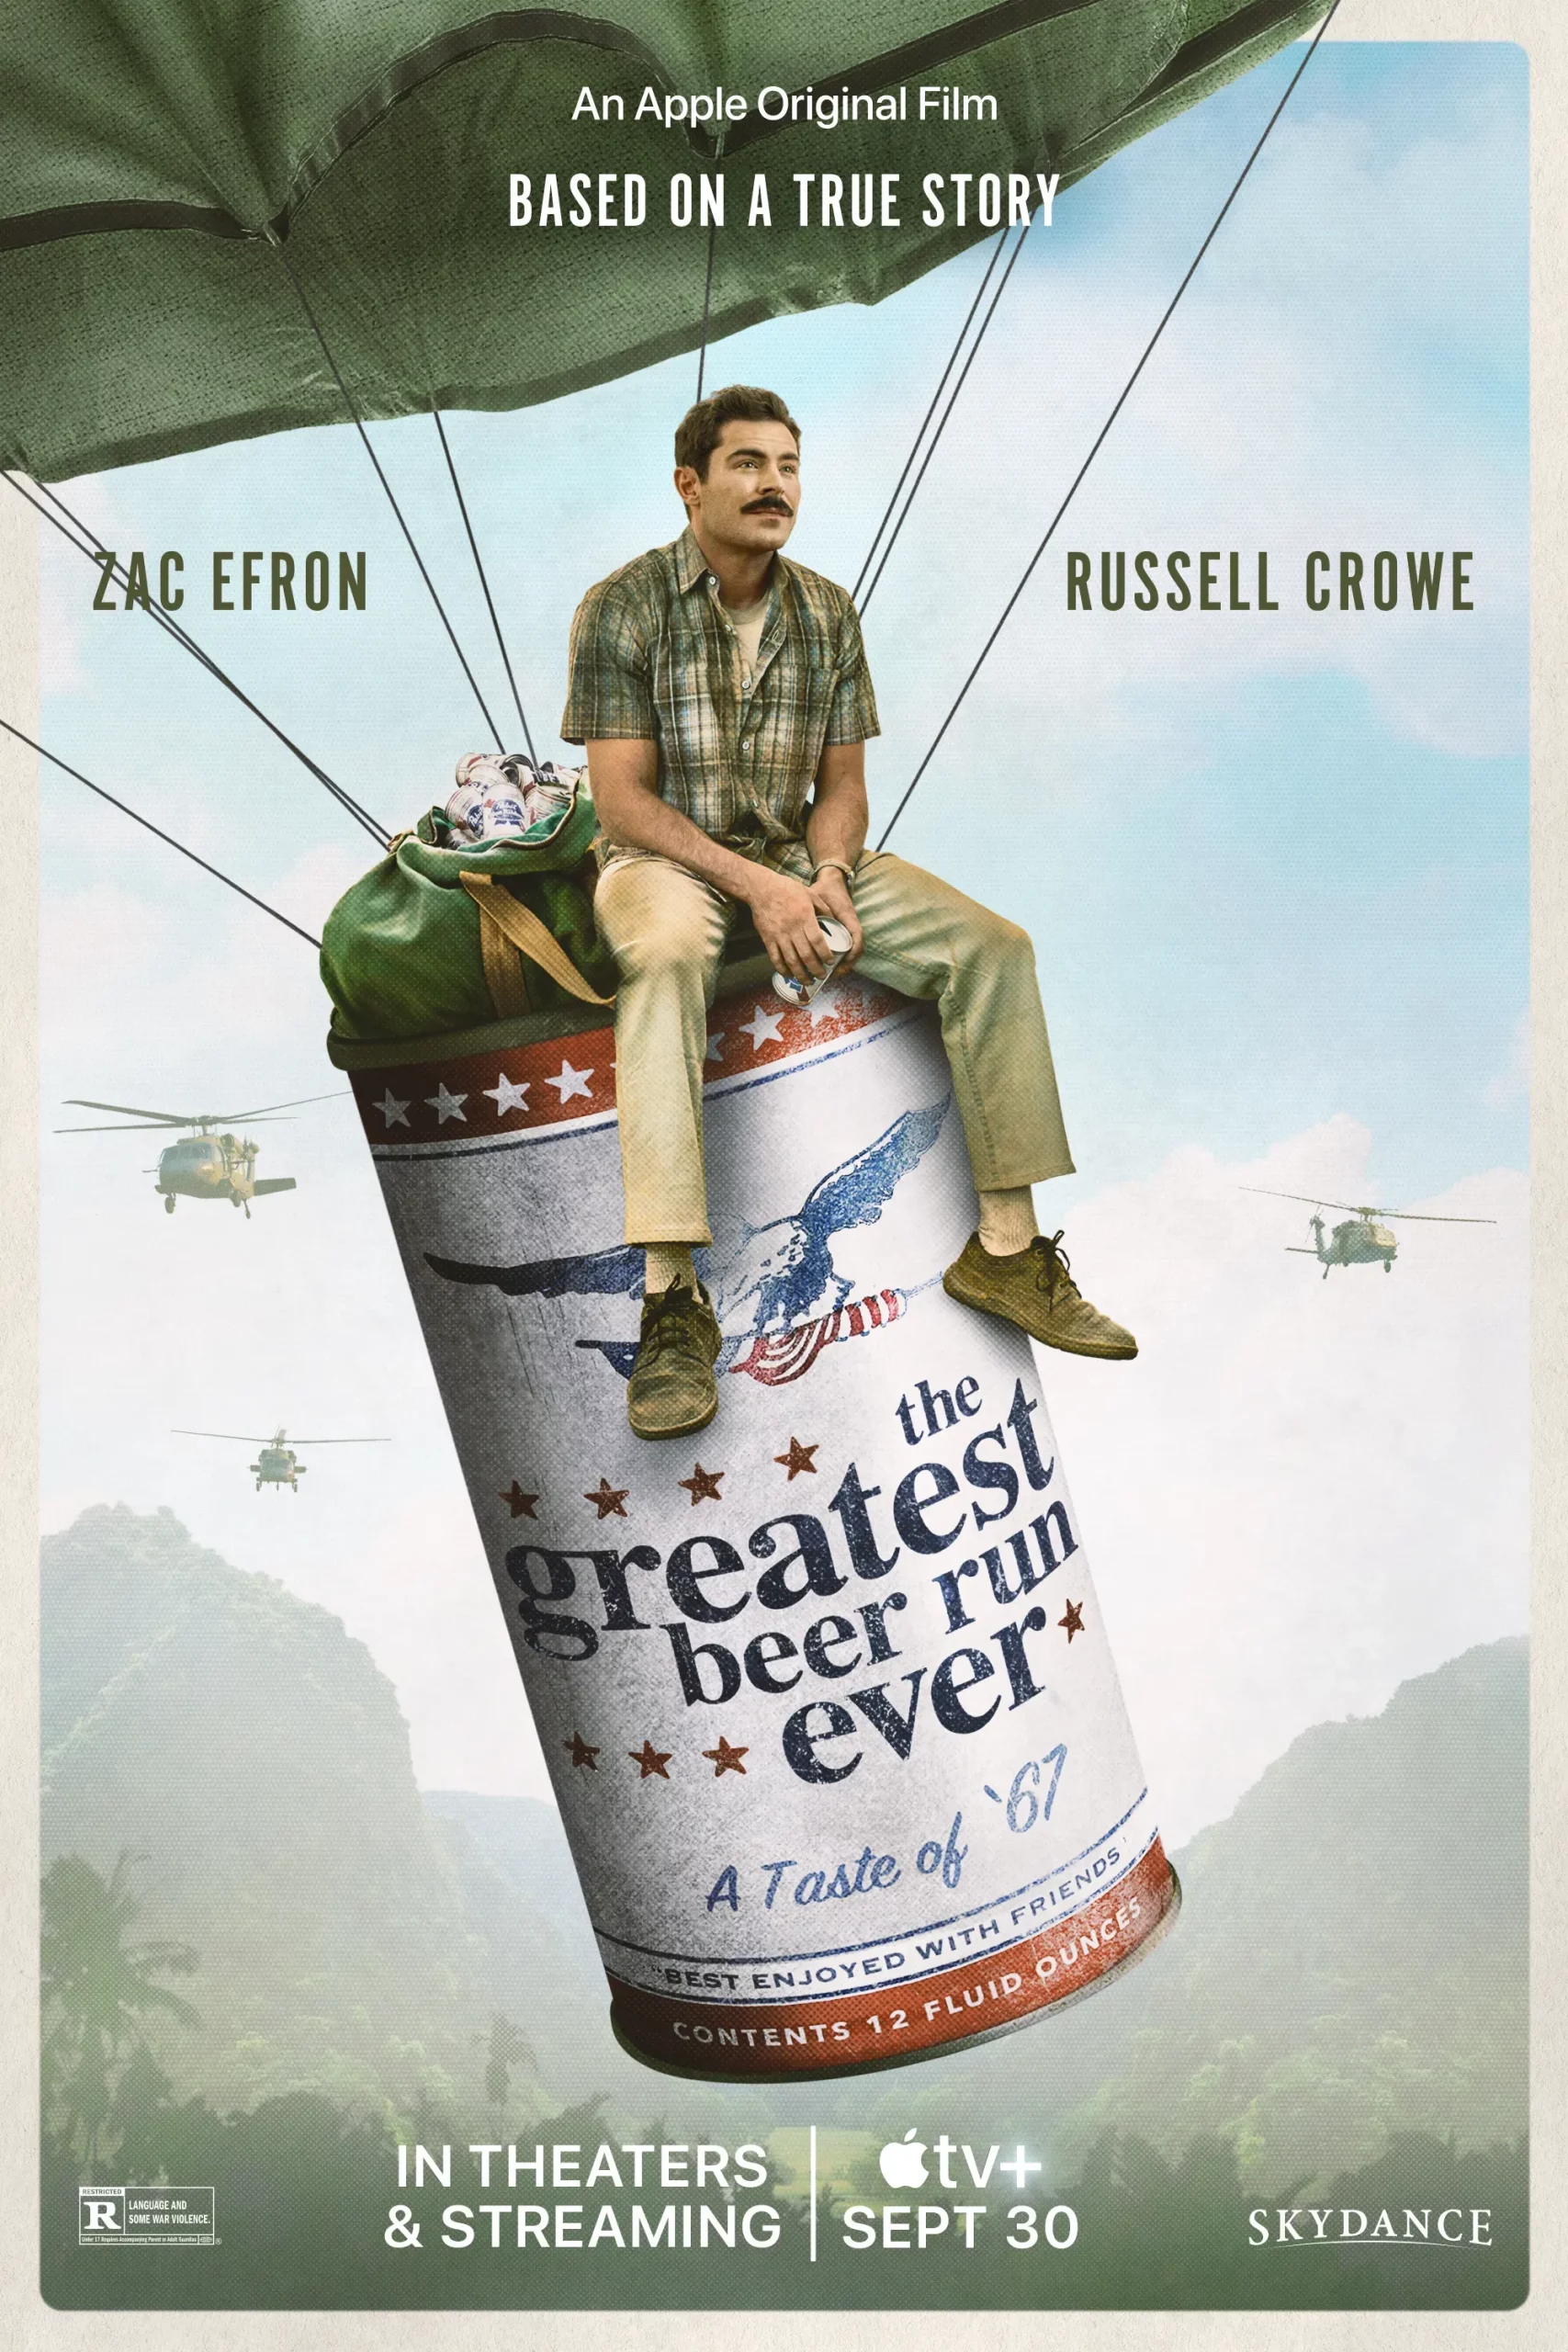 New film 'The Greatest Beer Run Ever‎' reveals Official Trailer and posters, coming to Northern America theaters on September 30 | FMV6